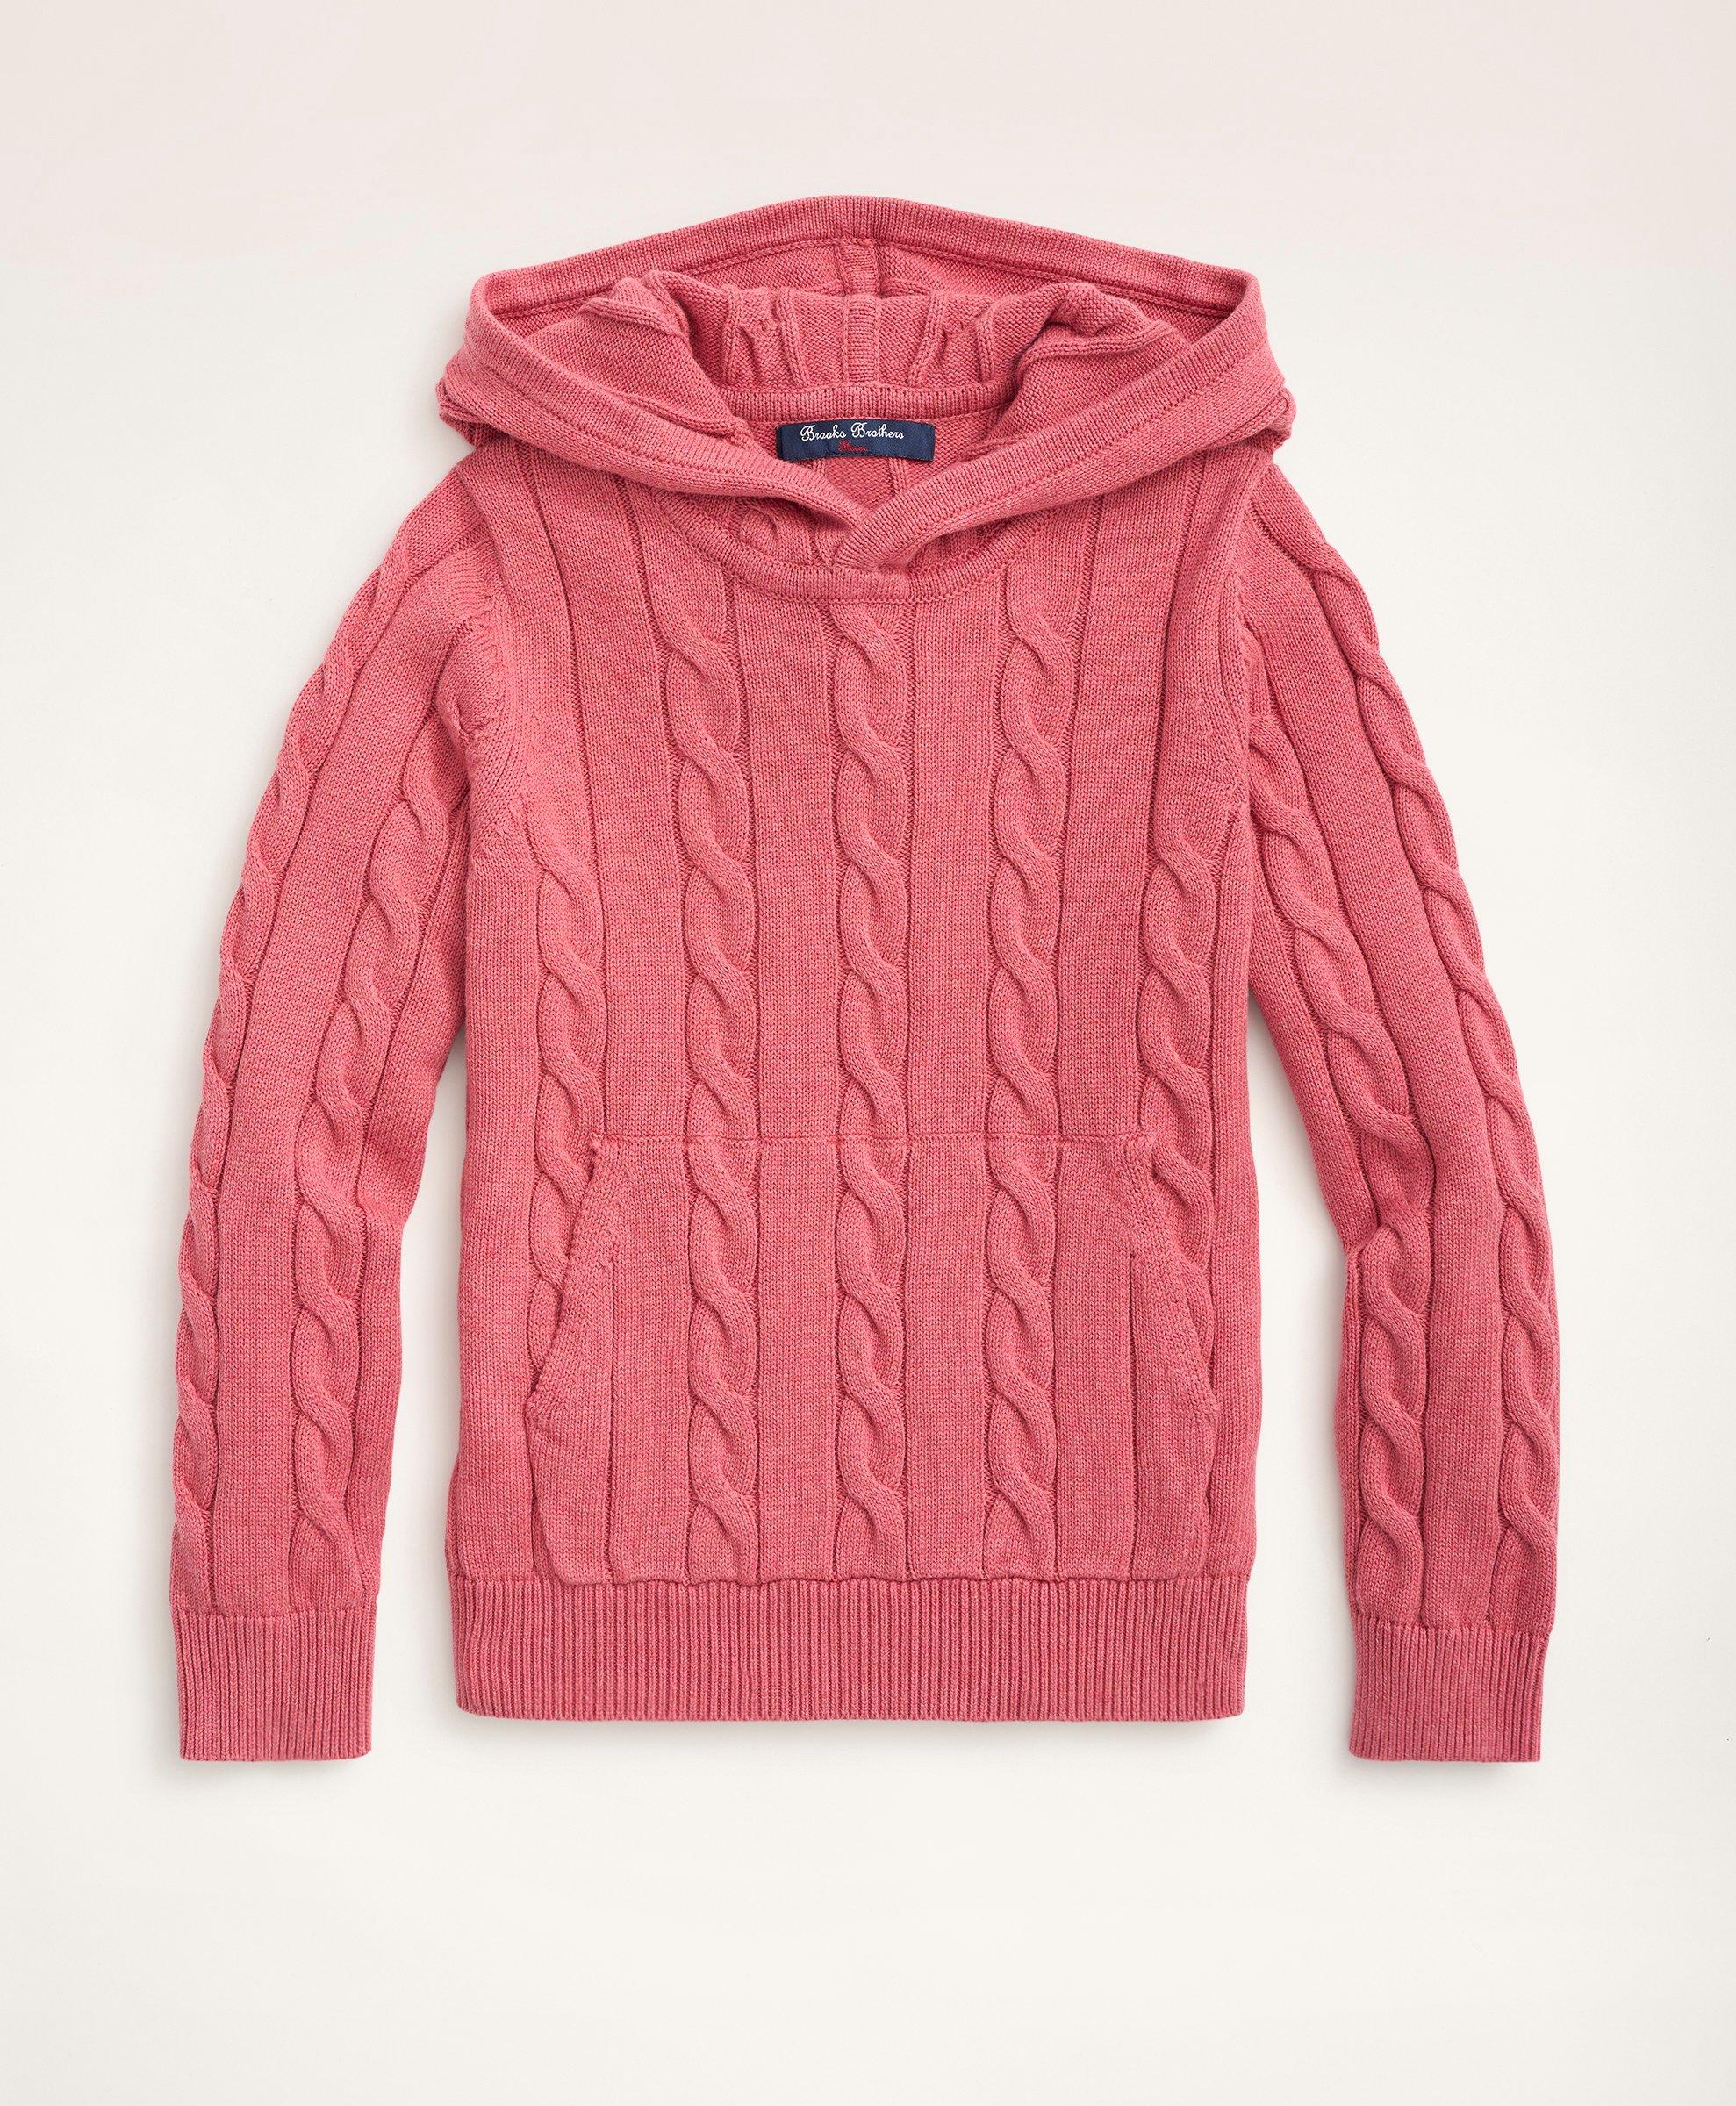 Brooks Brothers Kids'  Boys Cotton Cable-knit Hoodie Sweater | Dark Pink Heather | Size Medium